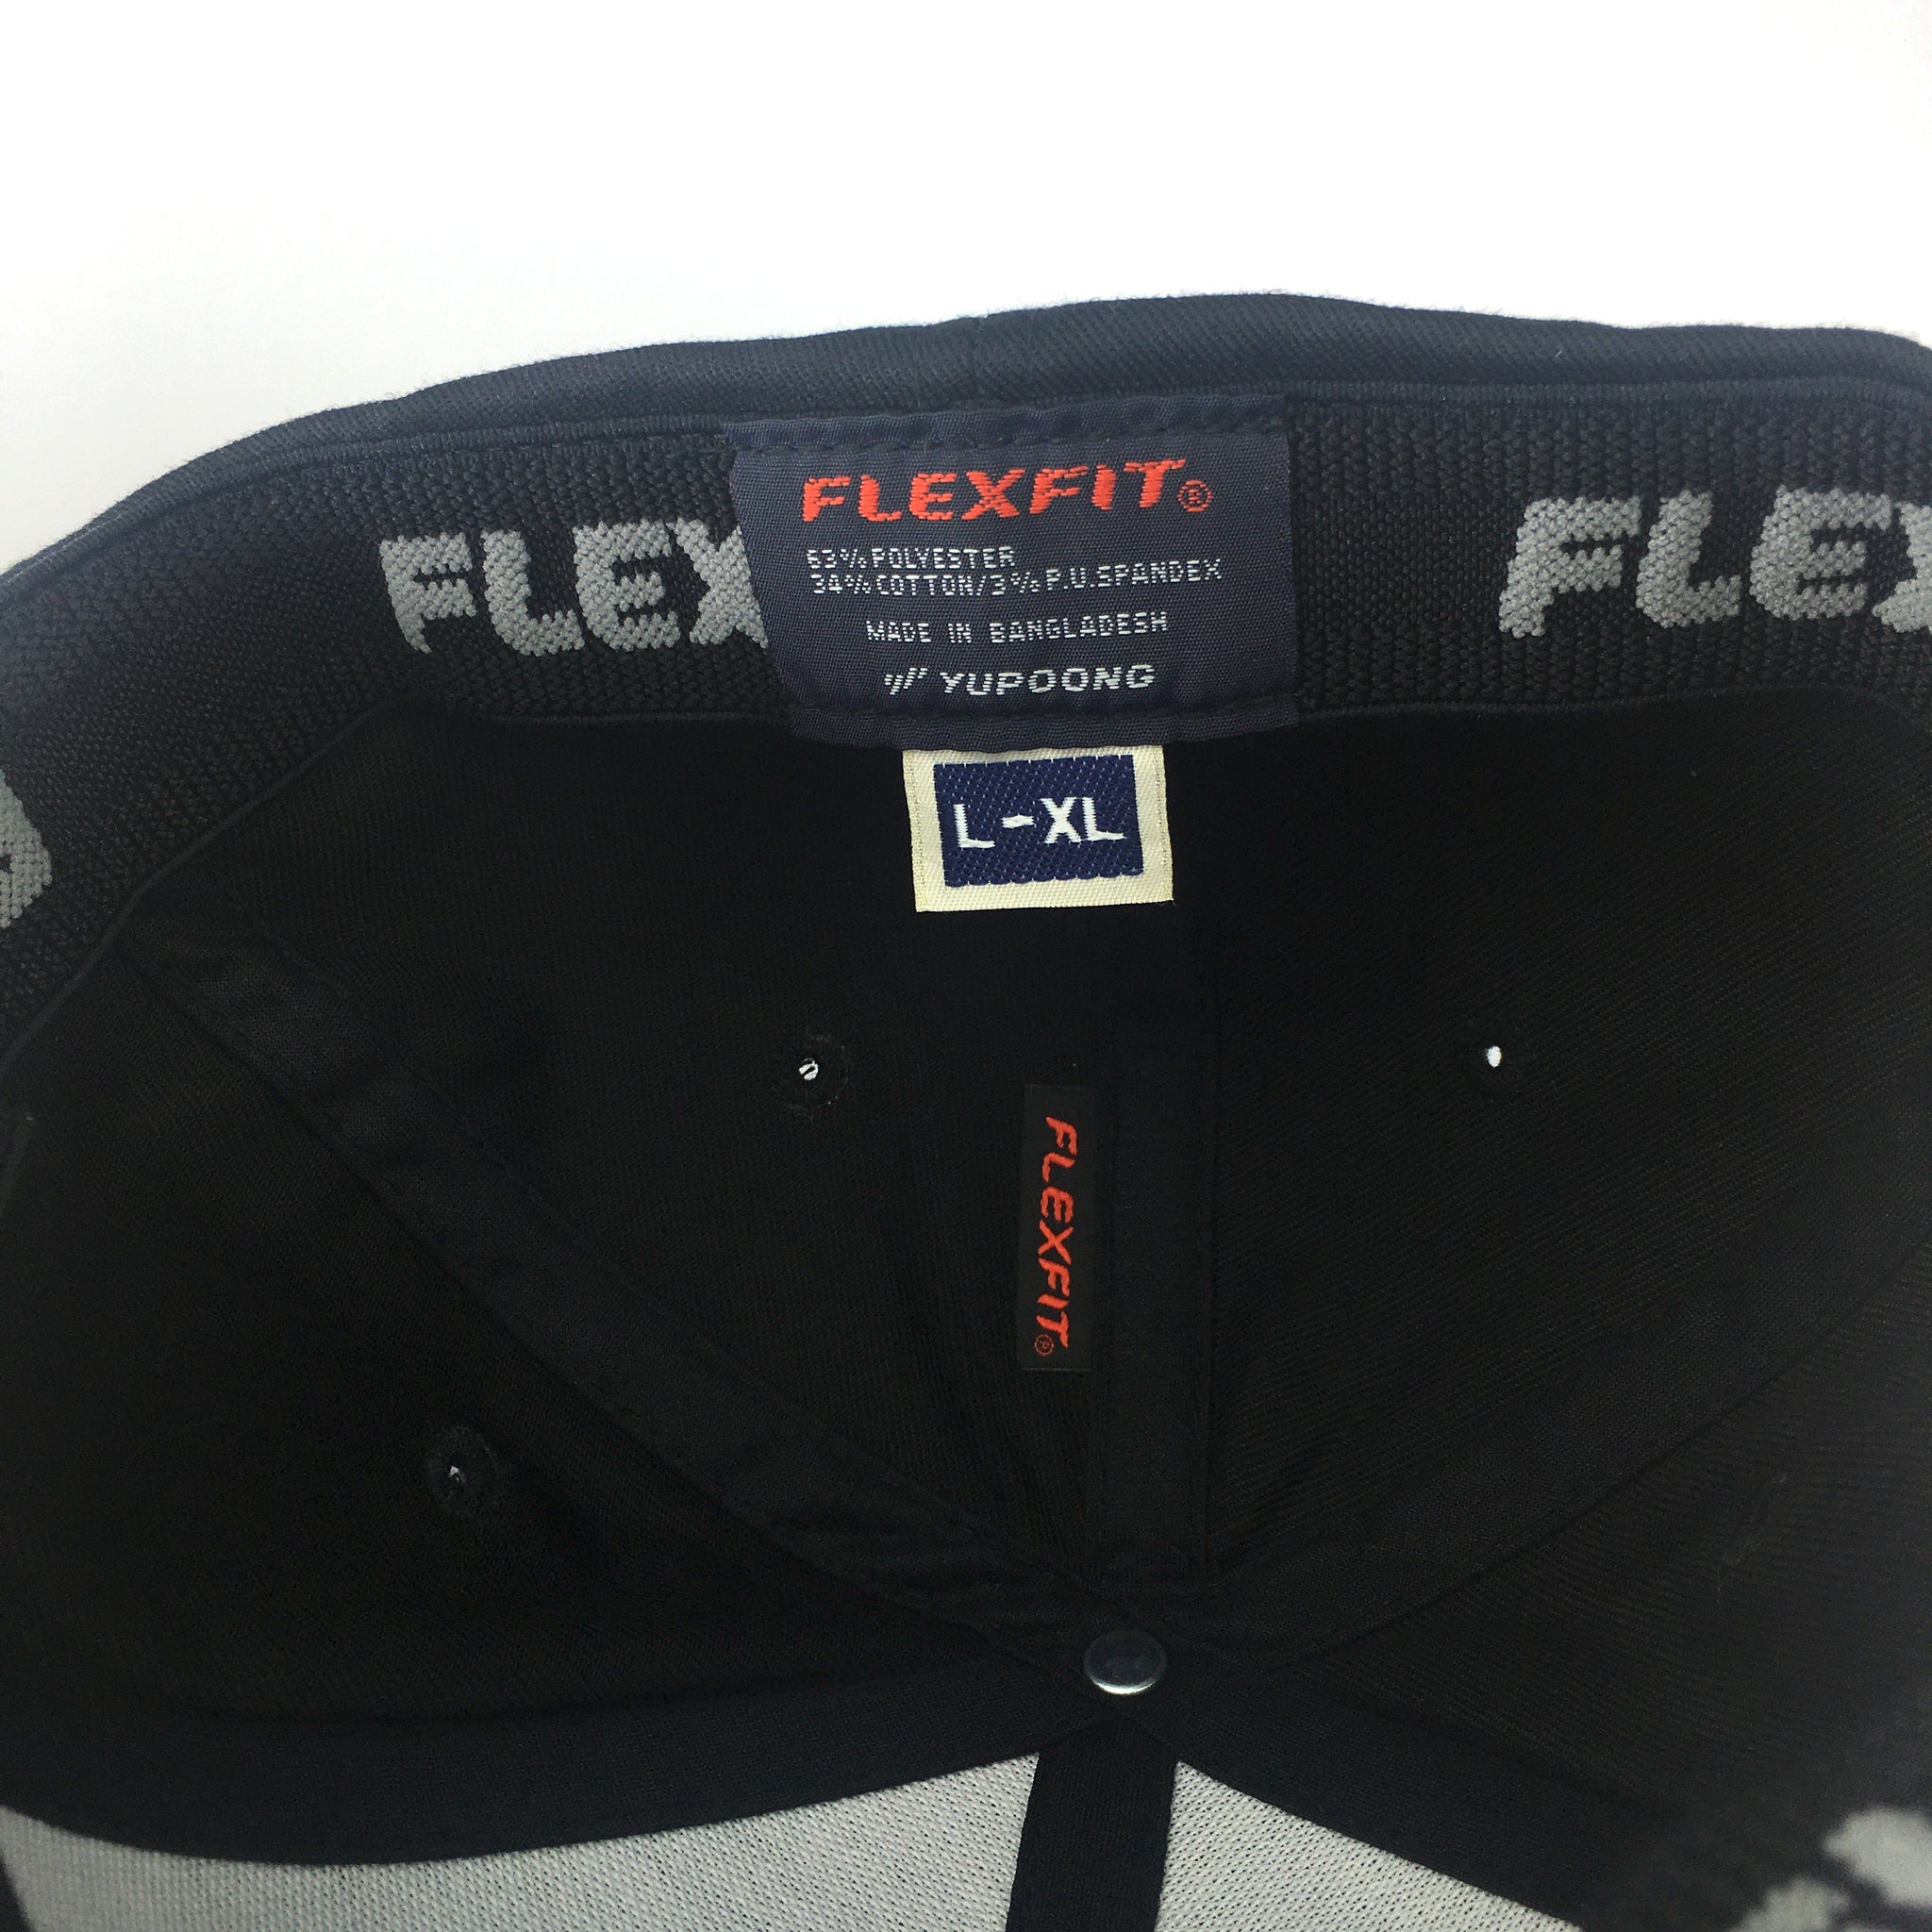 43 Red and Black two toned Fitted Flexfit – FortyThree™ USA | Flex Caps